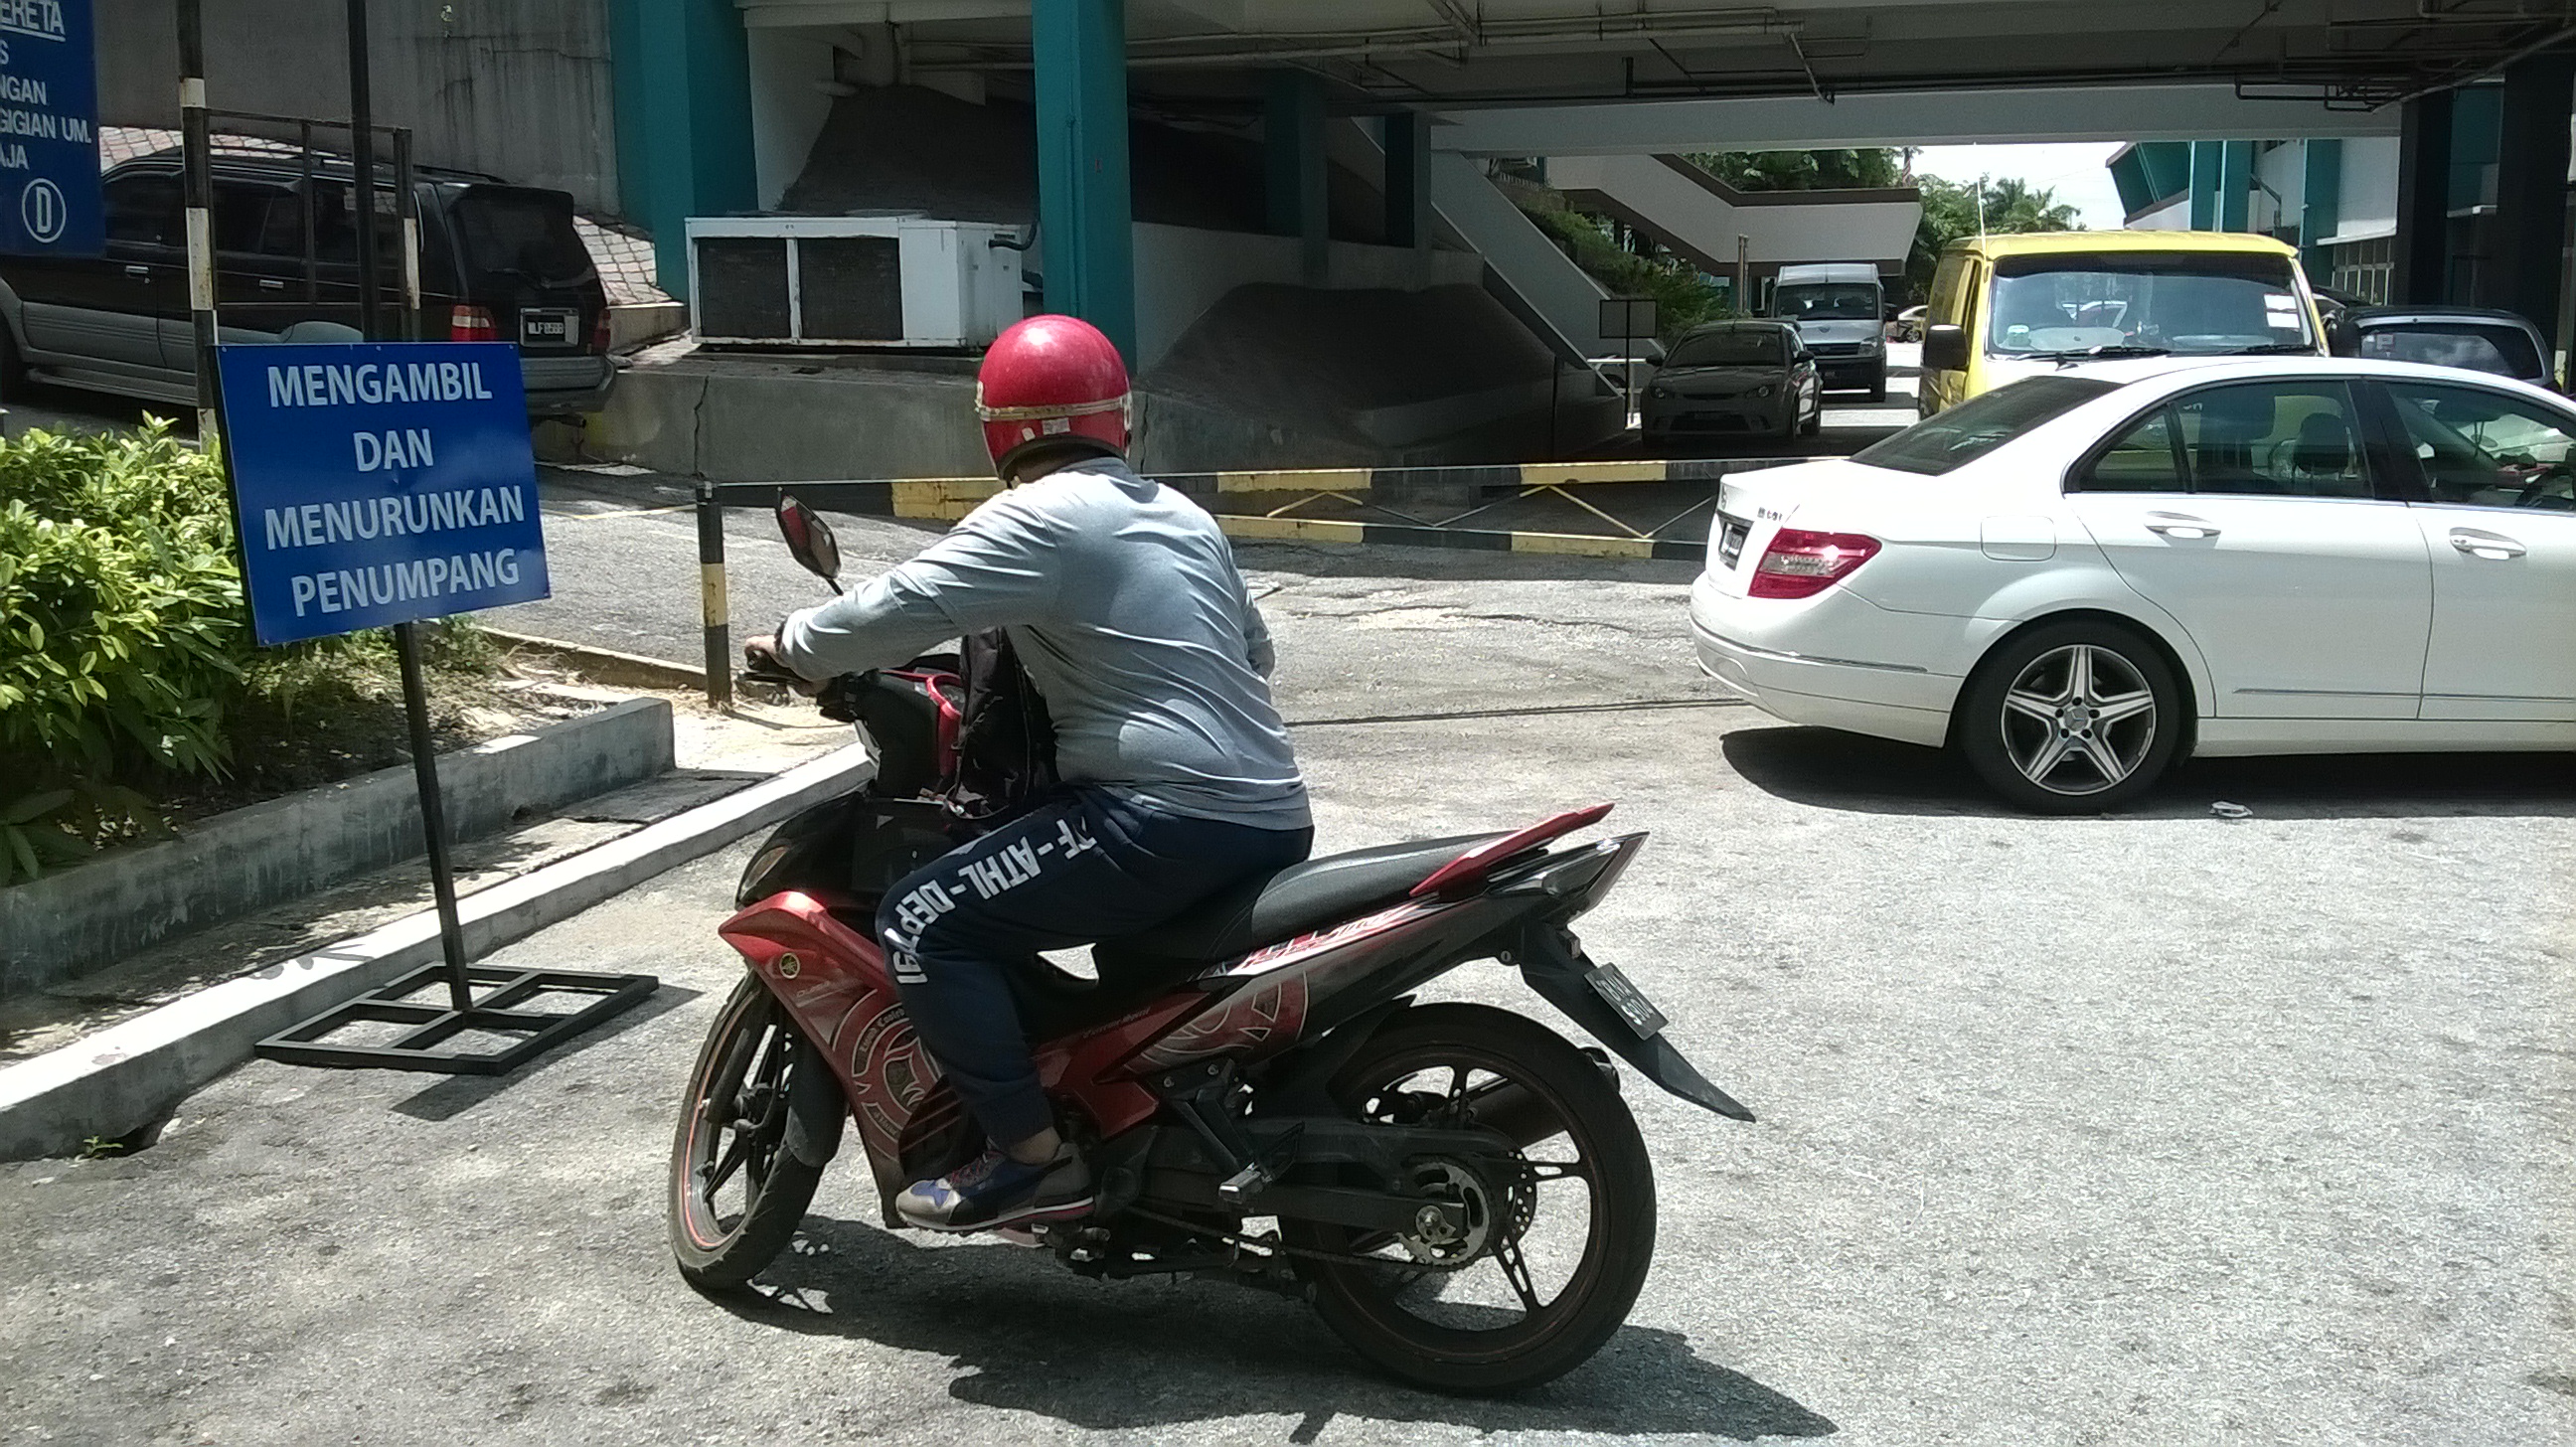 Halim says the methadone treatment helped save enough money to get his own motorbike.